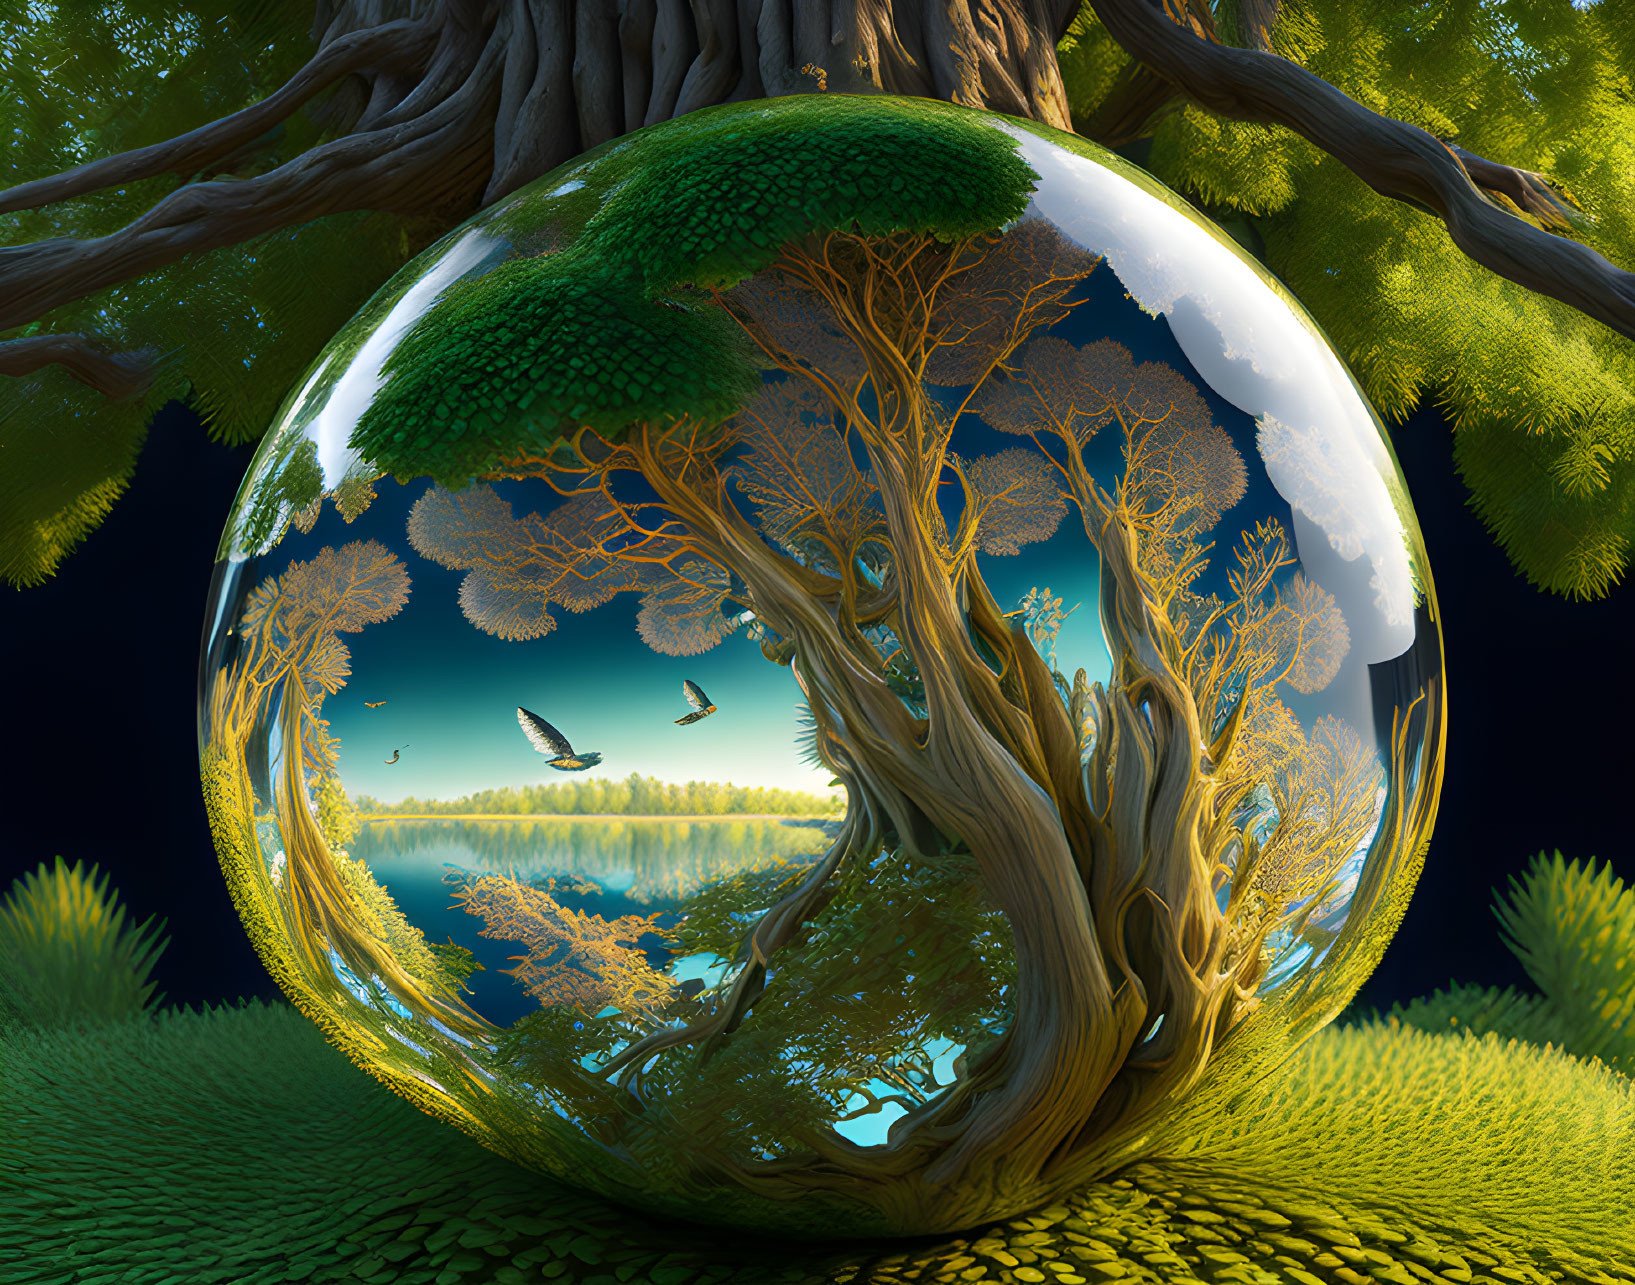 Surreal image of glossy sphere reflecting vibrant ecosystem and lush forest